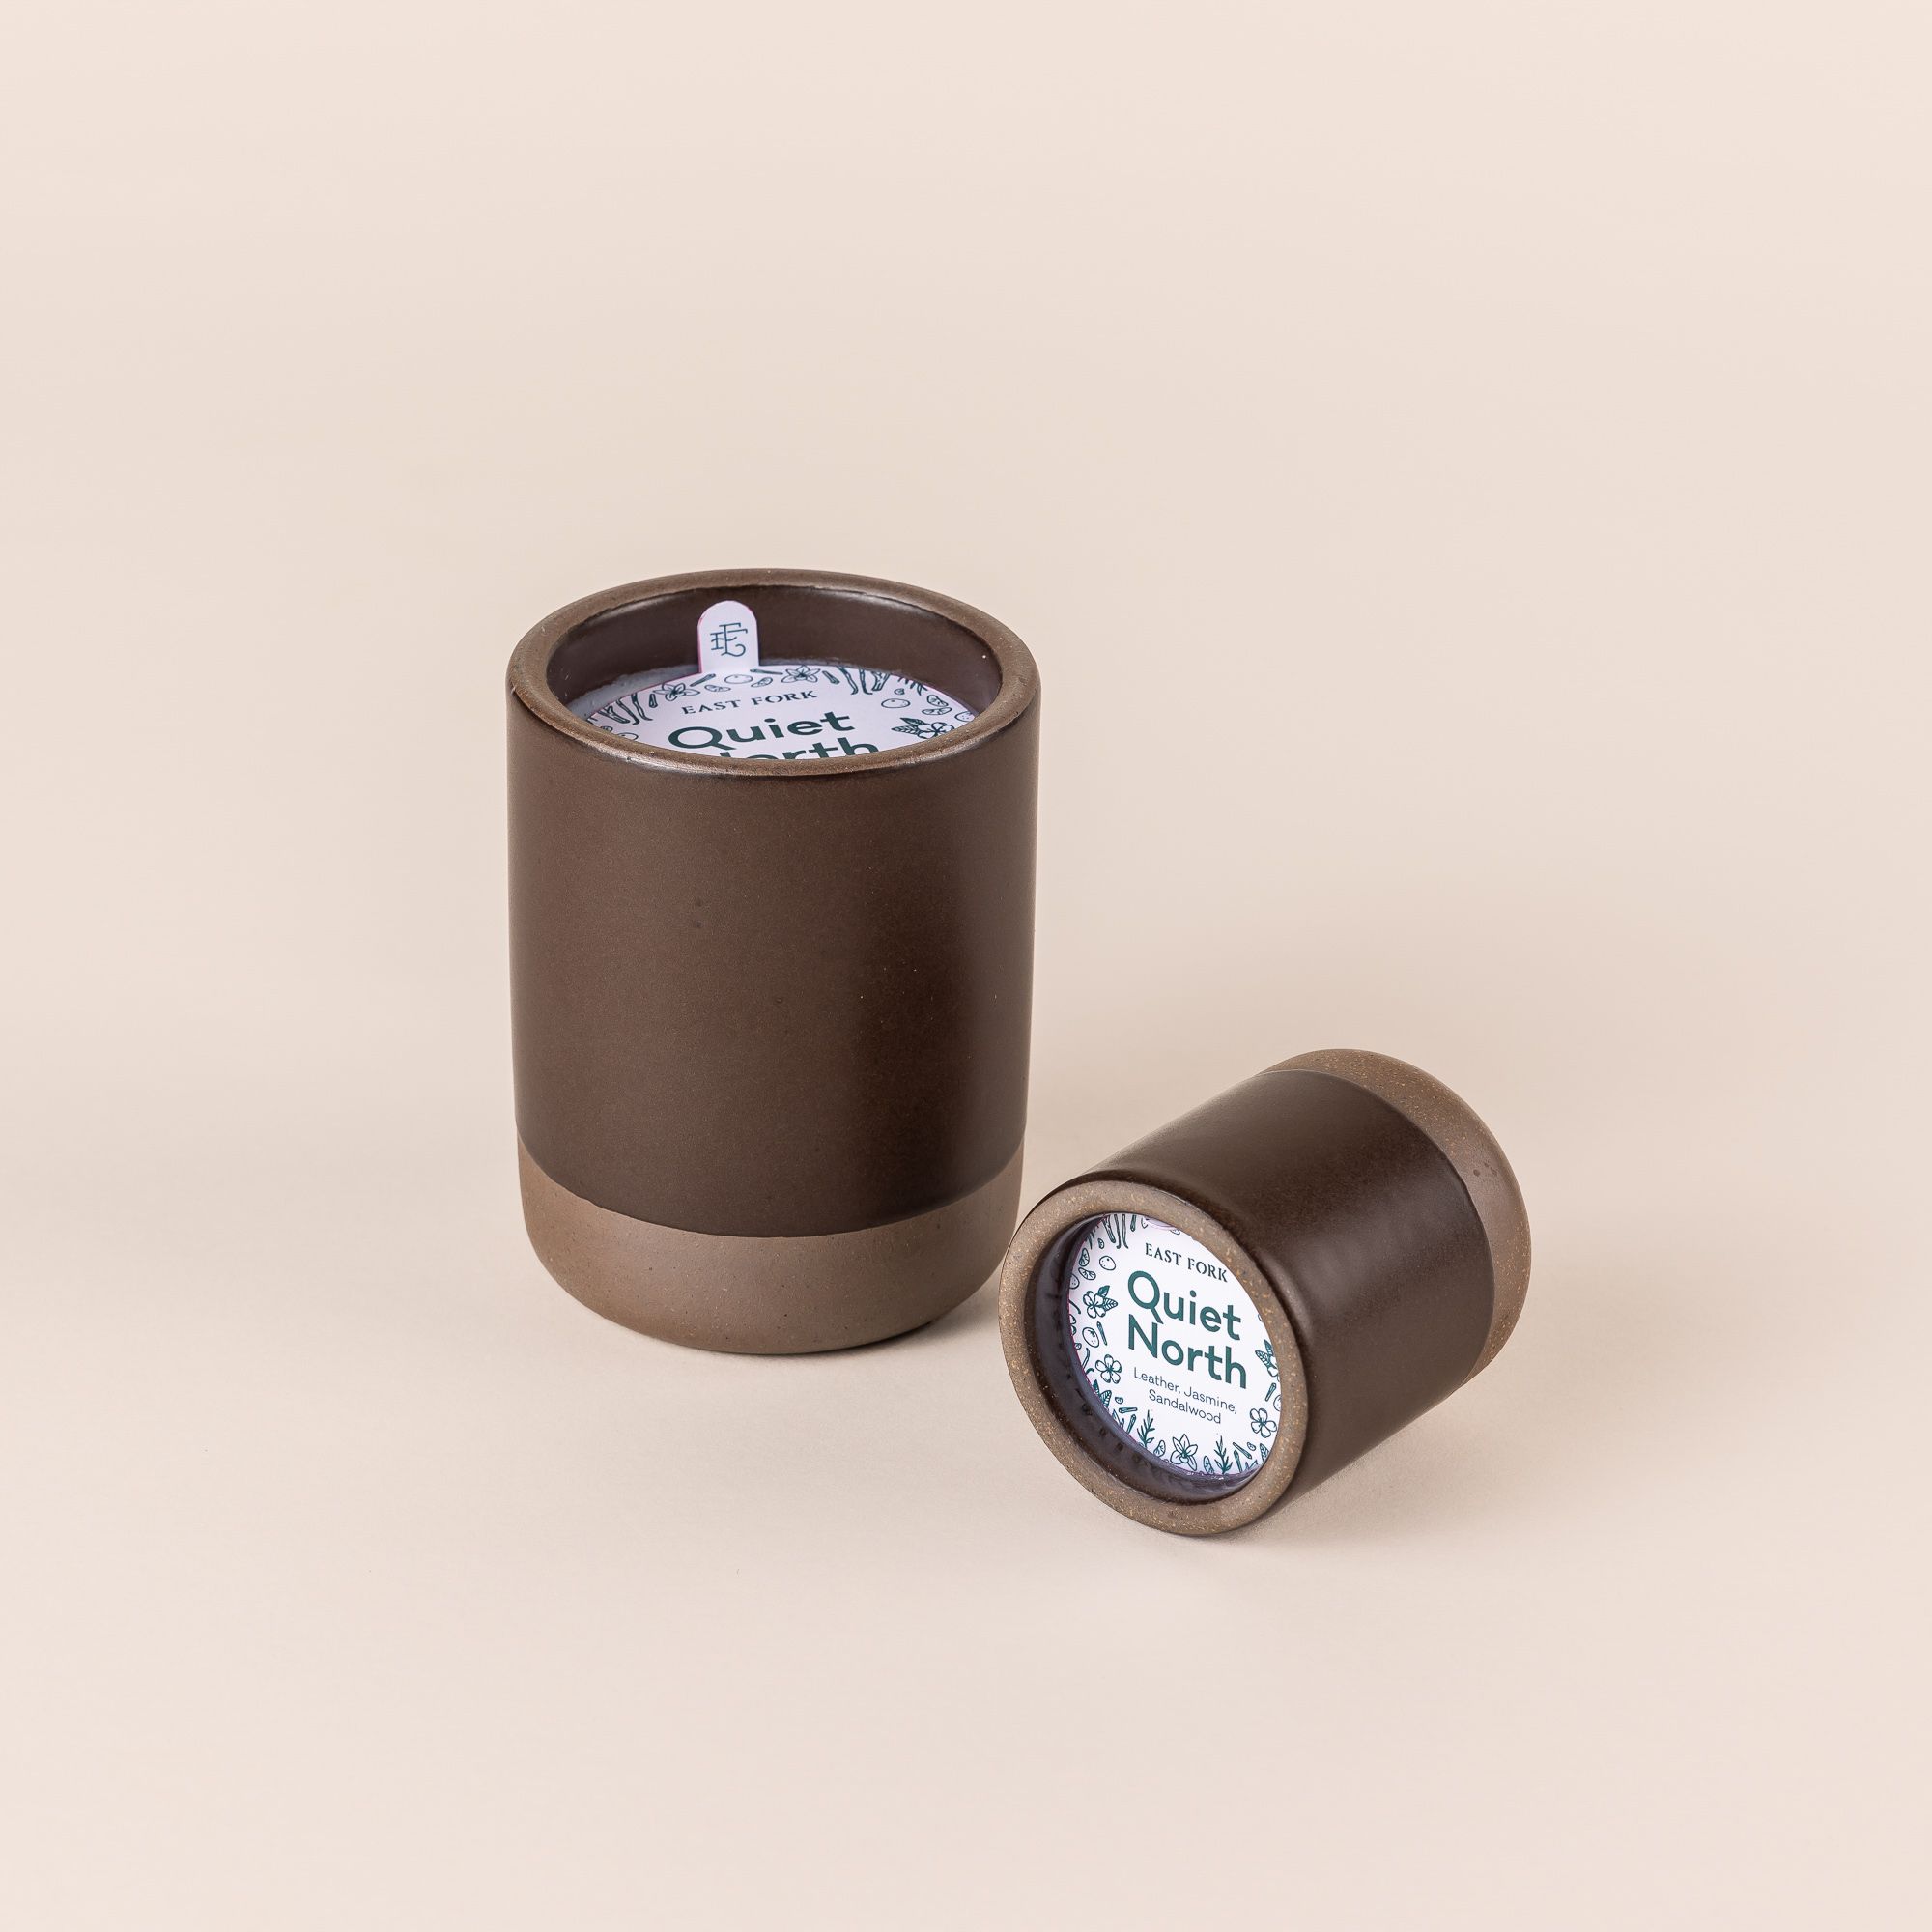 Large and small ceramic vessel in a dark cool brown color with candle inside. On top of each is a packaging label sitting on top that reads "Quiet North".